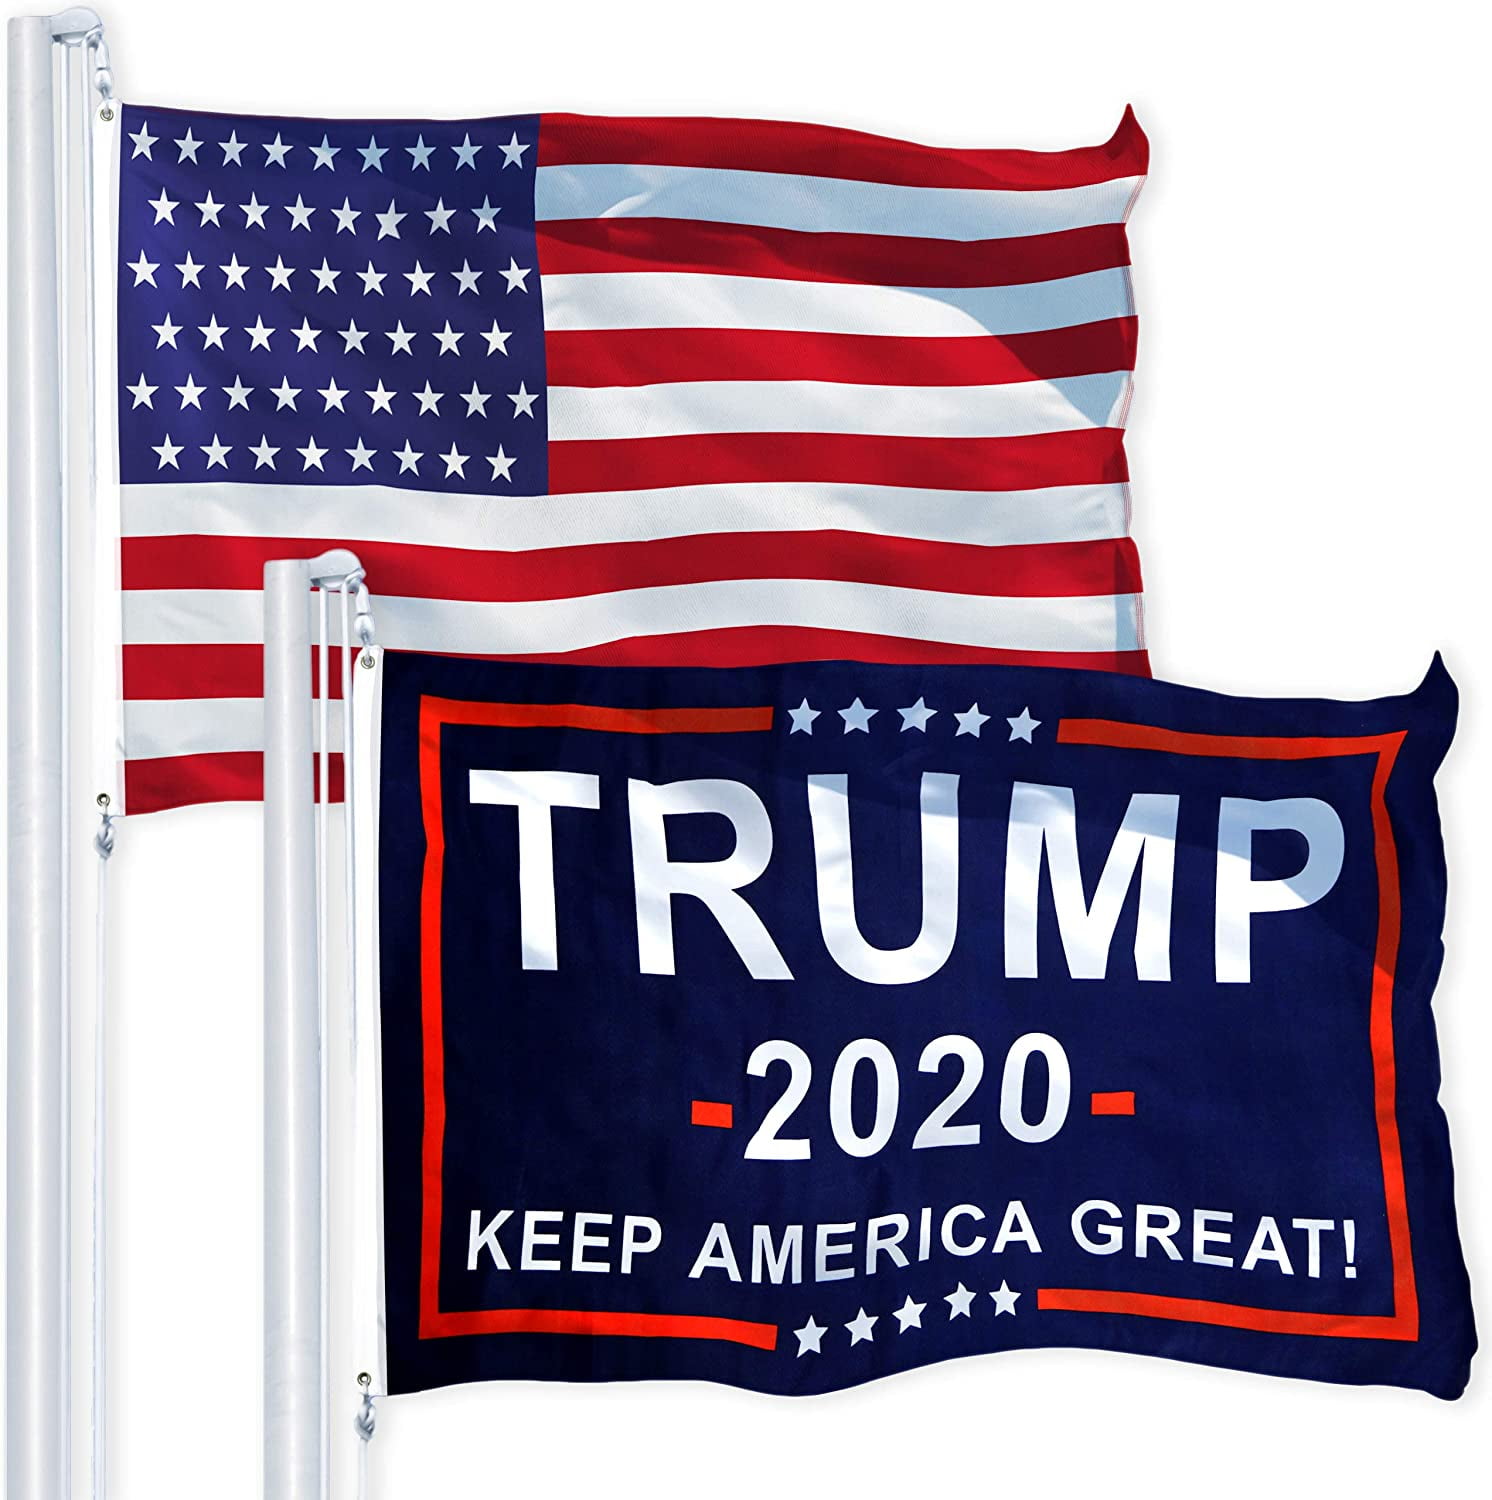 Trump 2020 3' x 5' Polyester Flags 16 Styles US Super  Seller Same Day Ship 